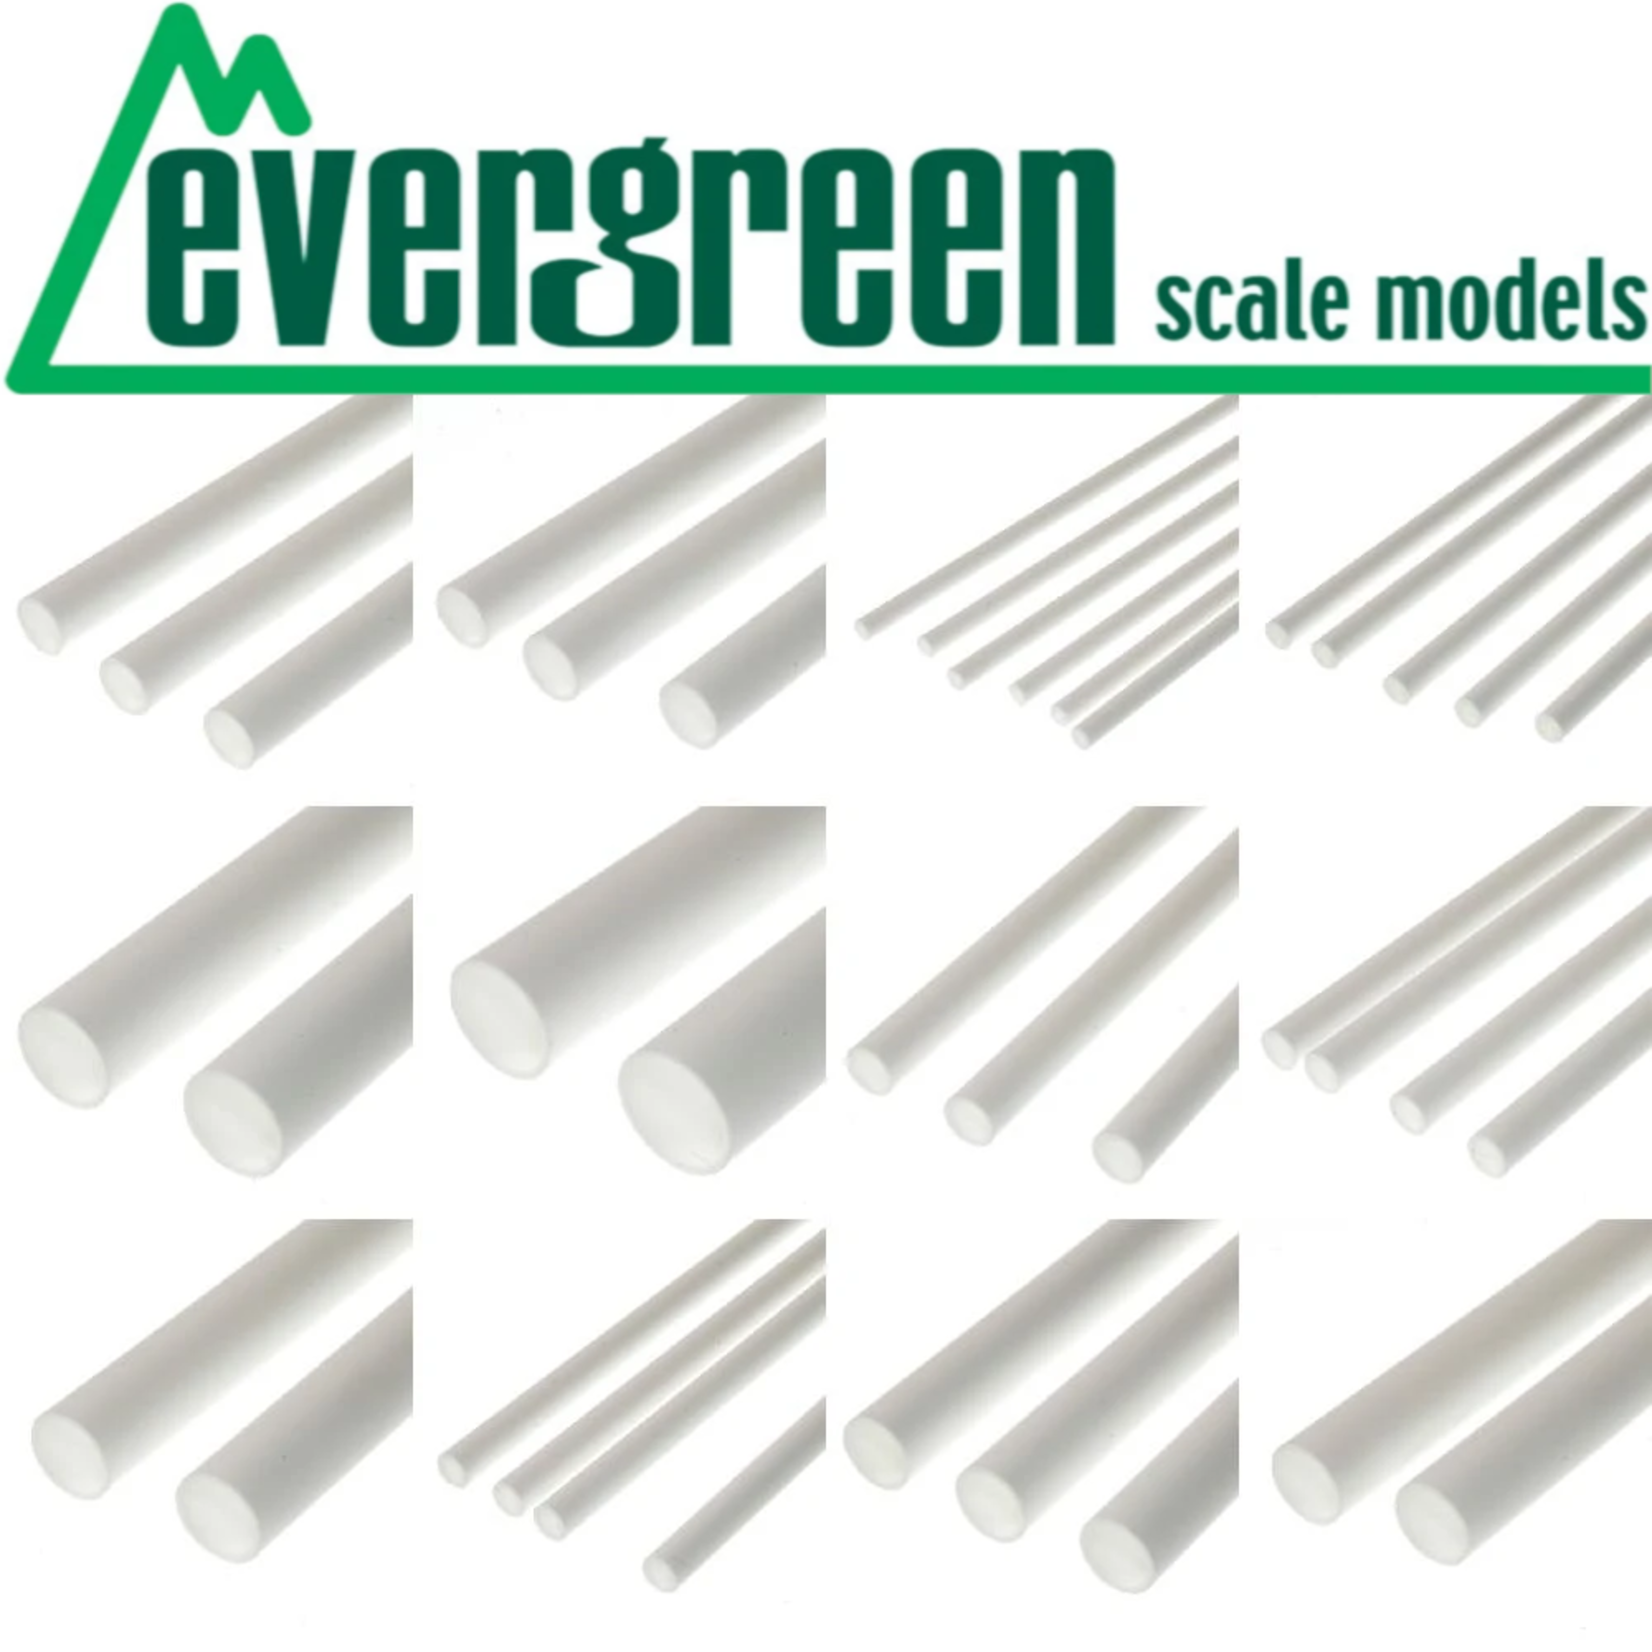 Evergreen Scale Models EVE291 Styrene .060 inch Angle (4pc)